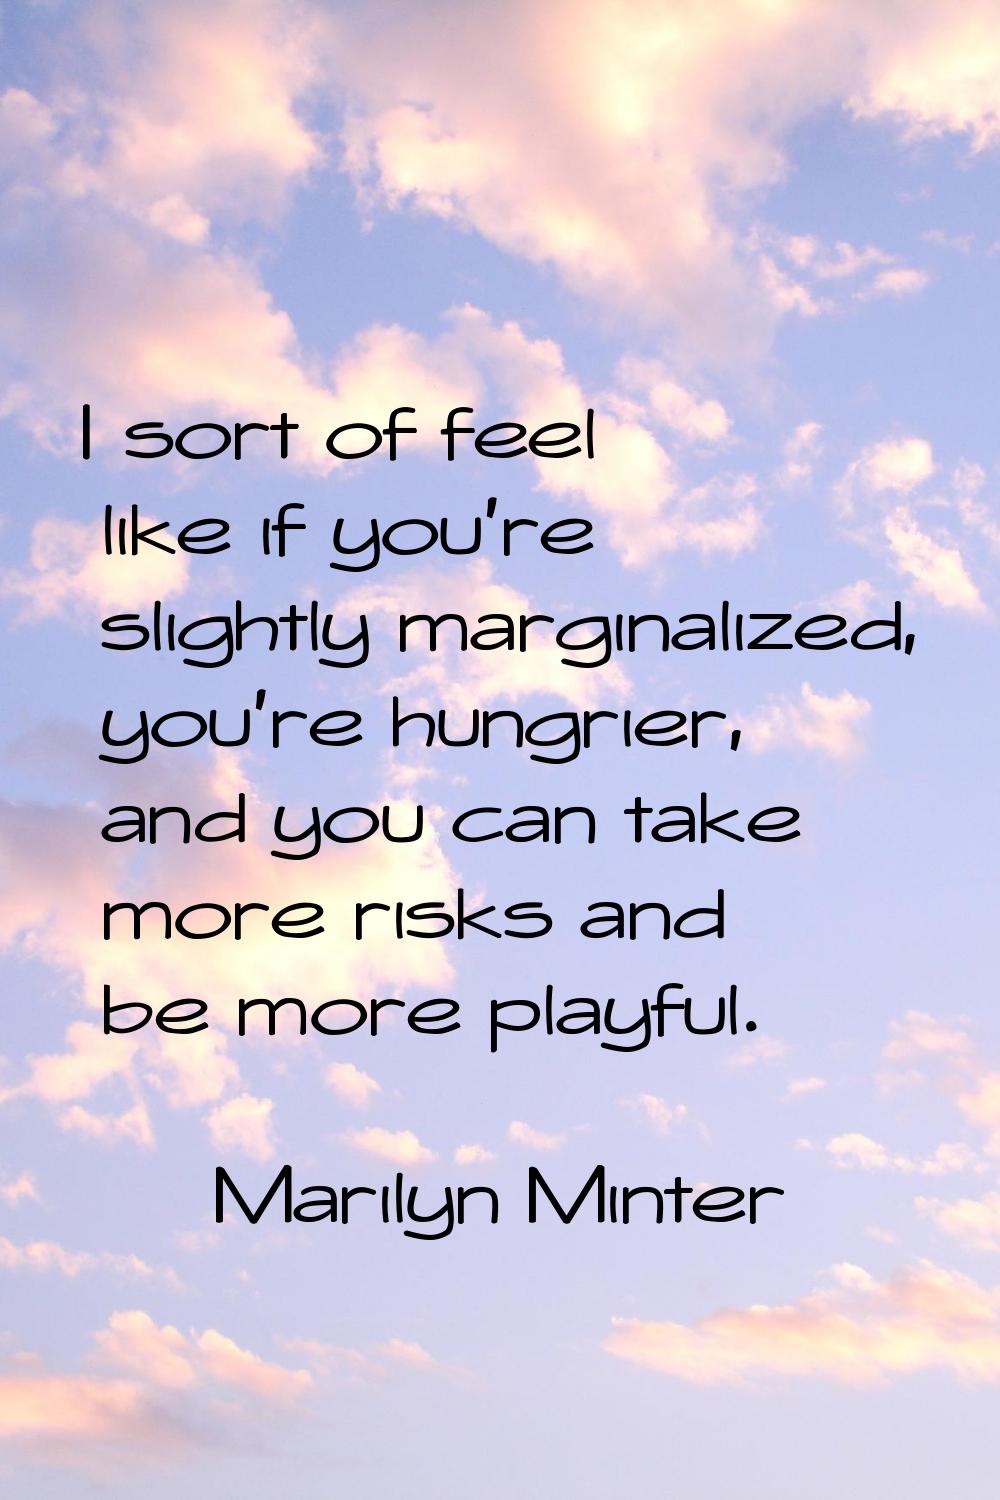 I sort of feel like if you're slightly marginalized, you're hungrier, and you can take more risks a